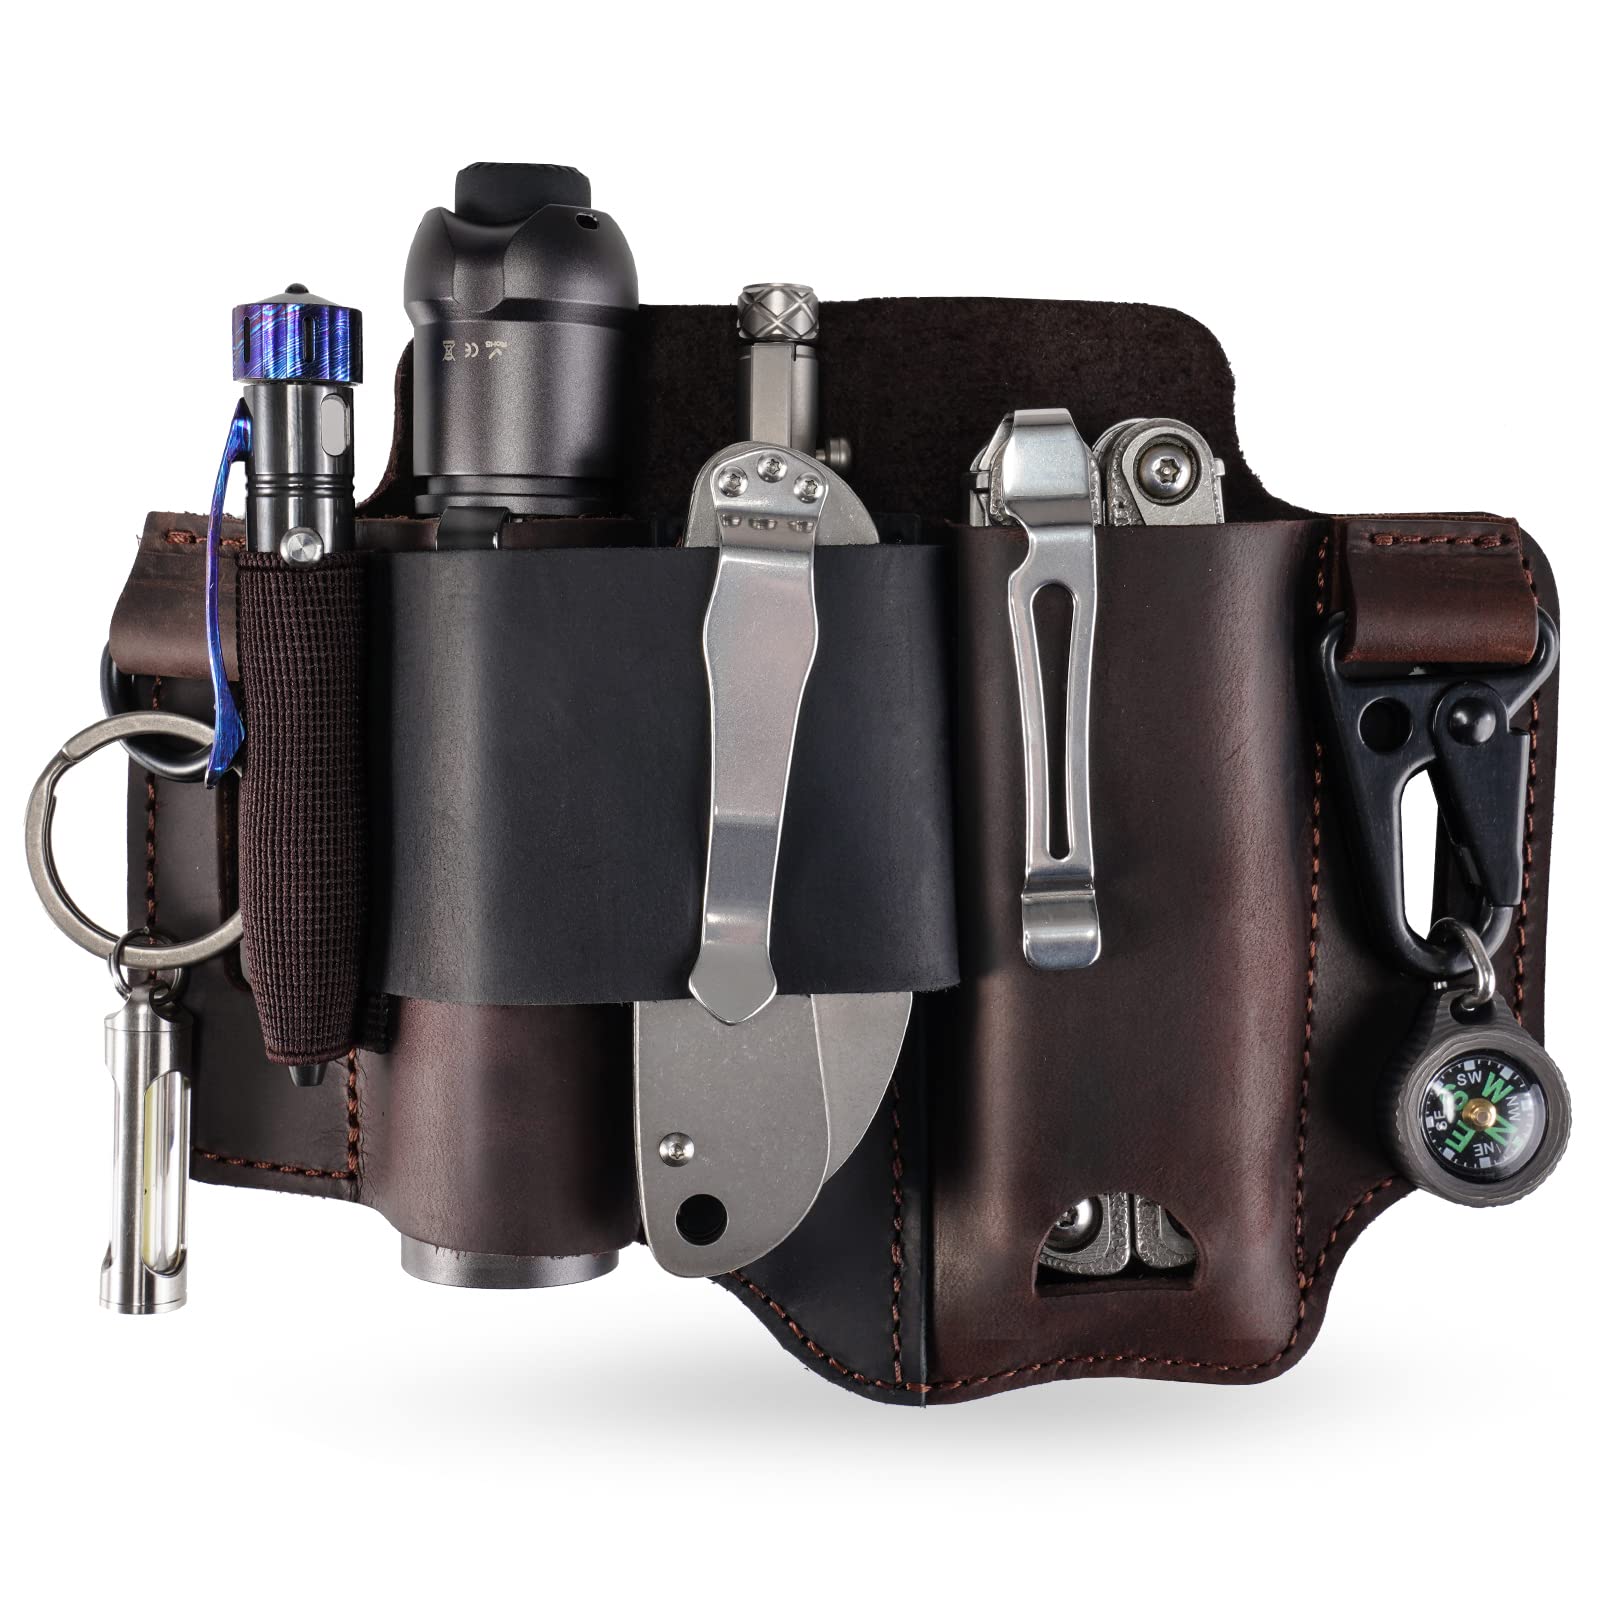 Leather Multitool Sheath - EDC Belt Organizer for Leatherman Tools, Flashlight, Pen, and Keychain Clip, Durable and Stylish, Great for Work and Daily Use, Ideal Gift for Men